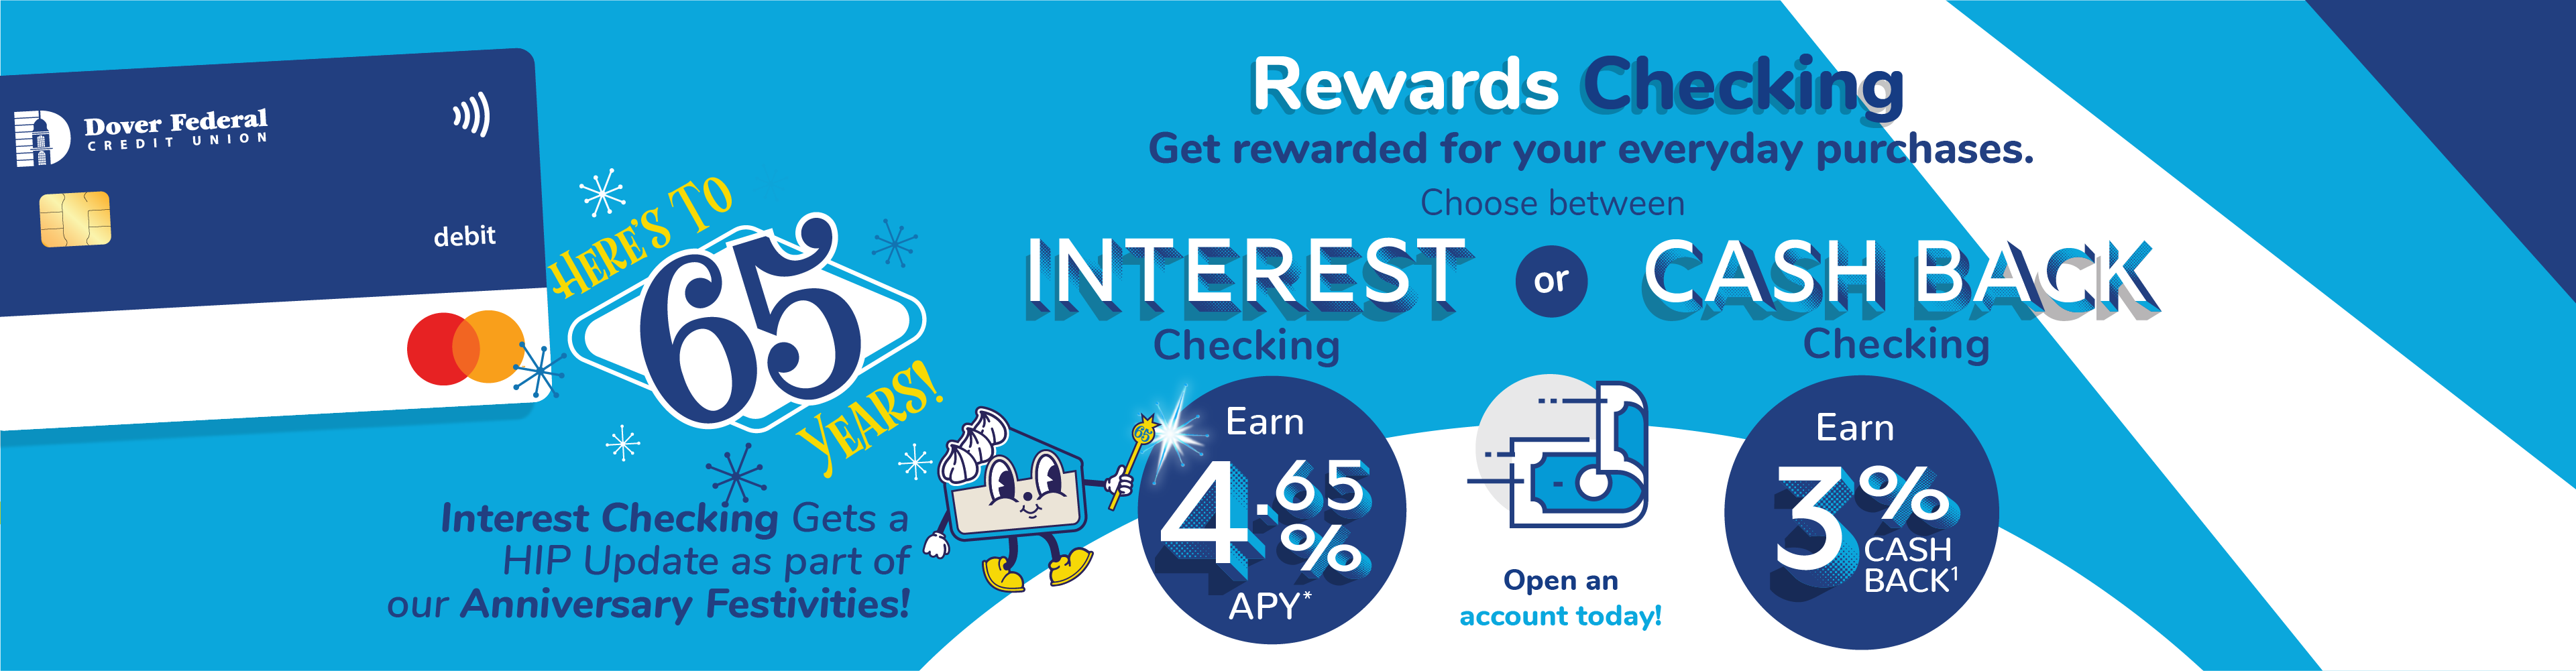 Rewards Checking featuring Interest Checking at a special Anniversary rate of 4.65%